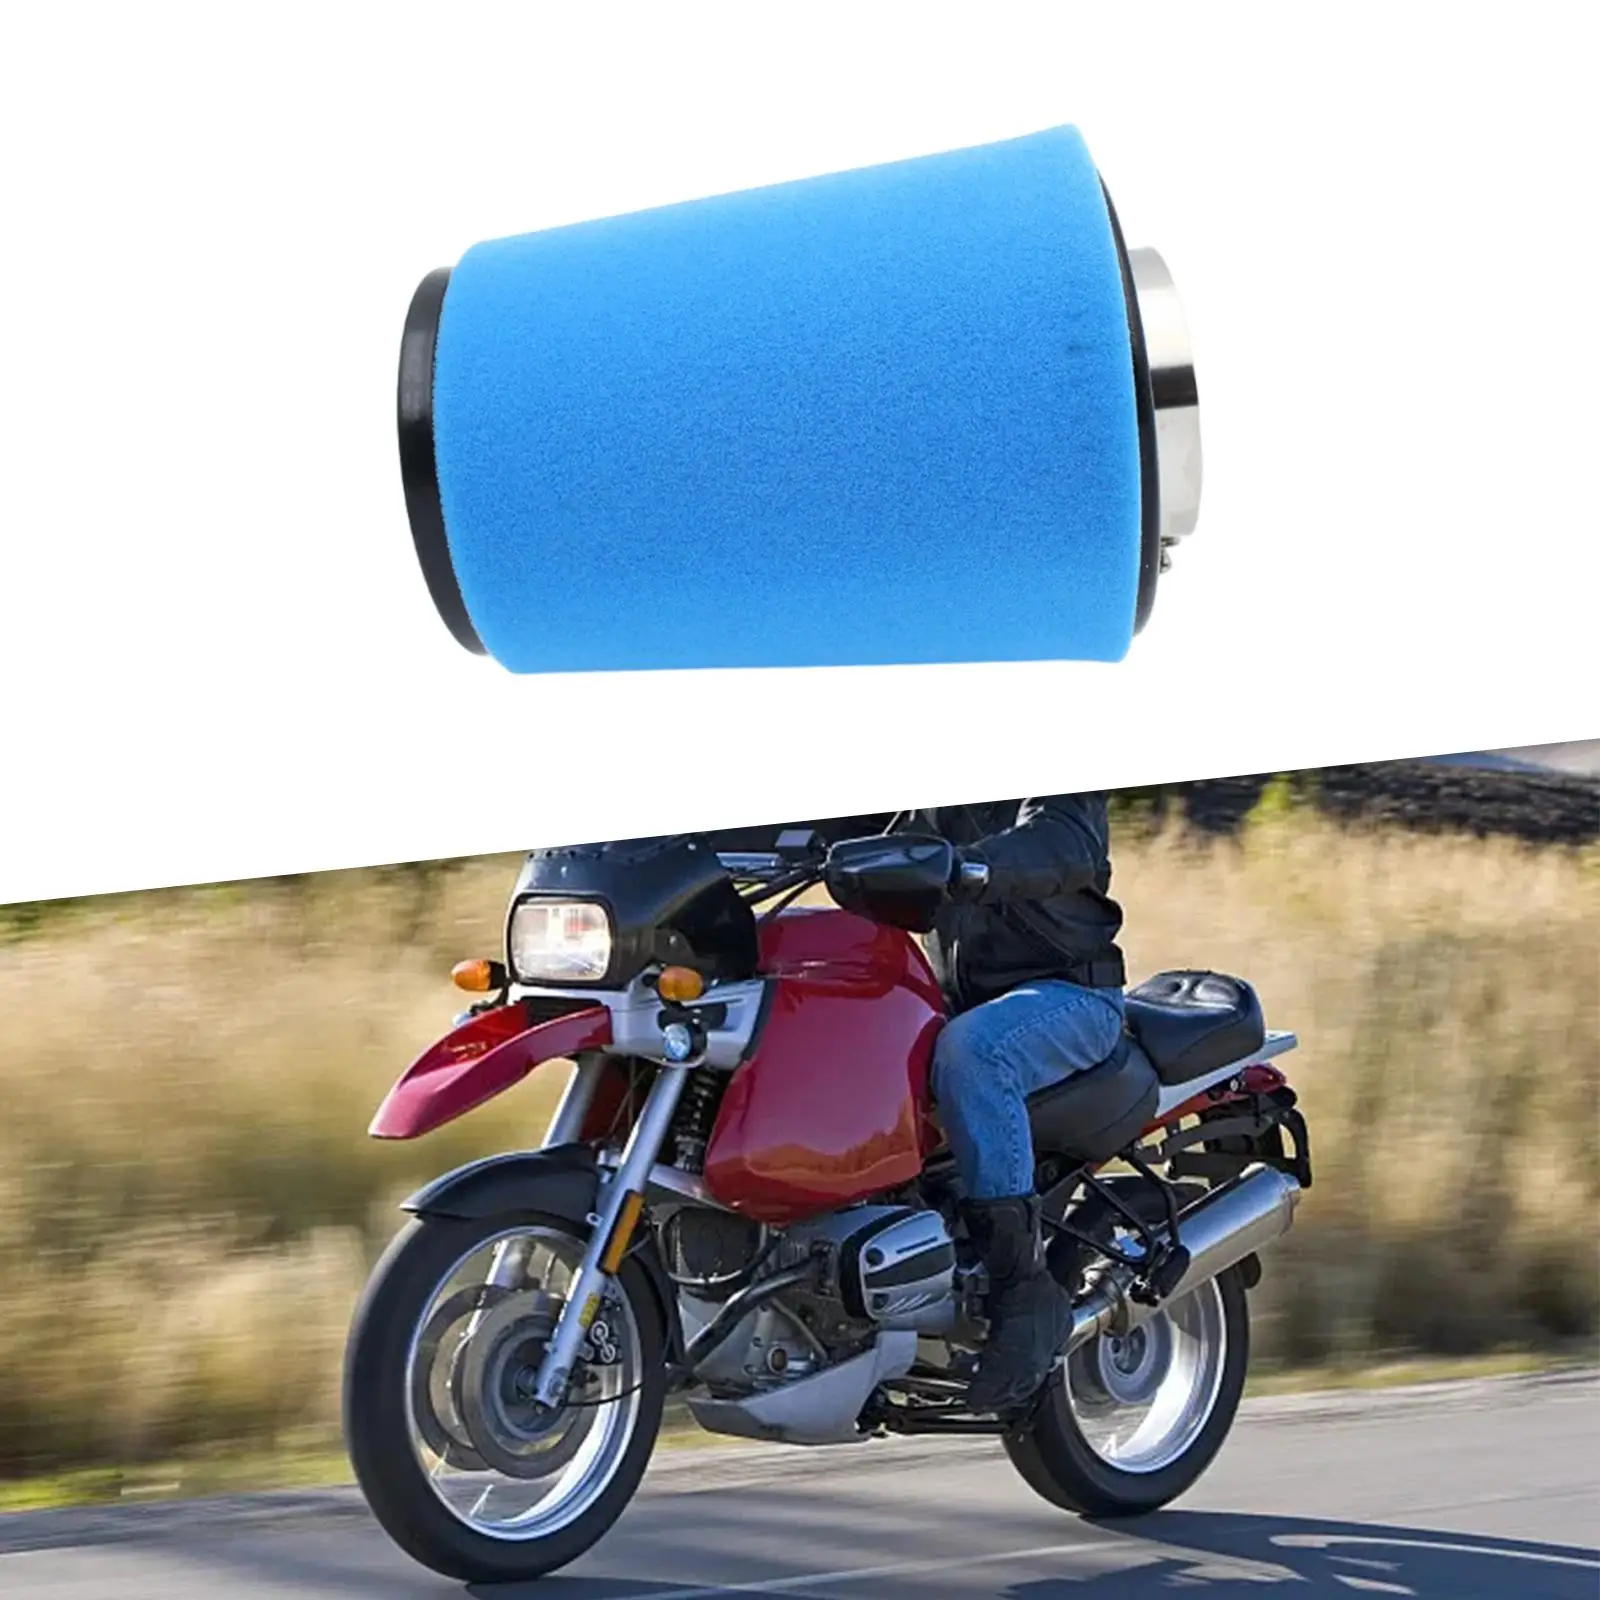 Motorcycle Air Filter Cleaner 0800-112000 High Quality for Cfmoto x8 Zforce 500 800 Uforce 500 800 Cforce 400 500 500S 800